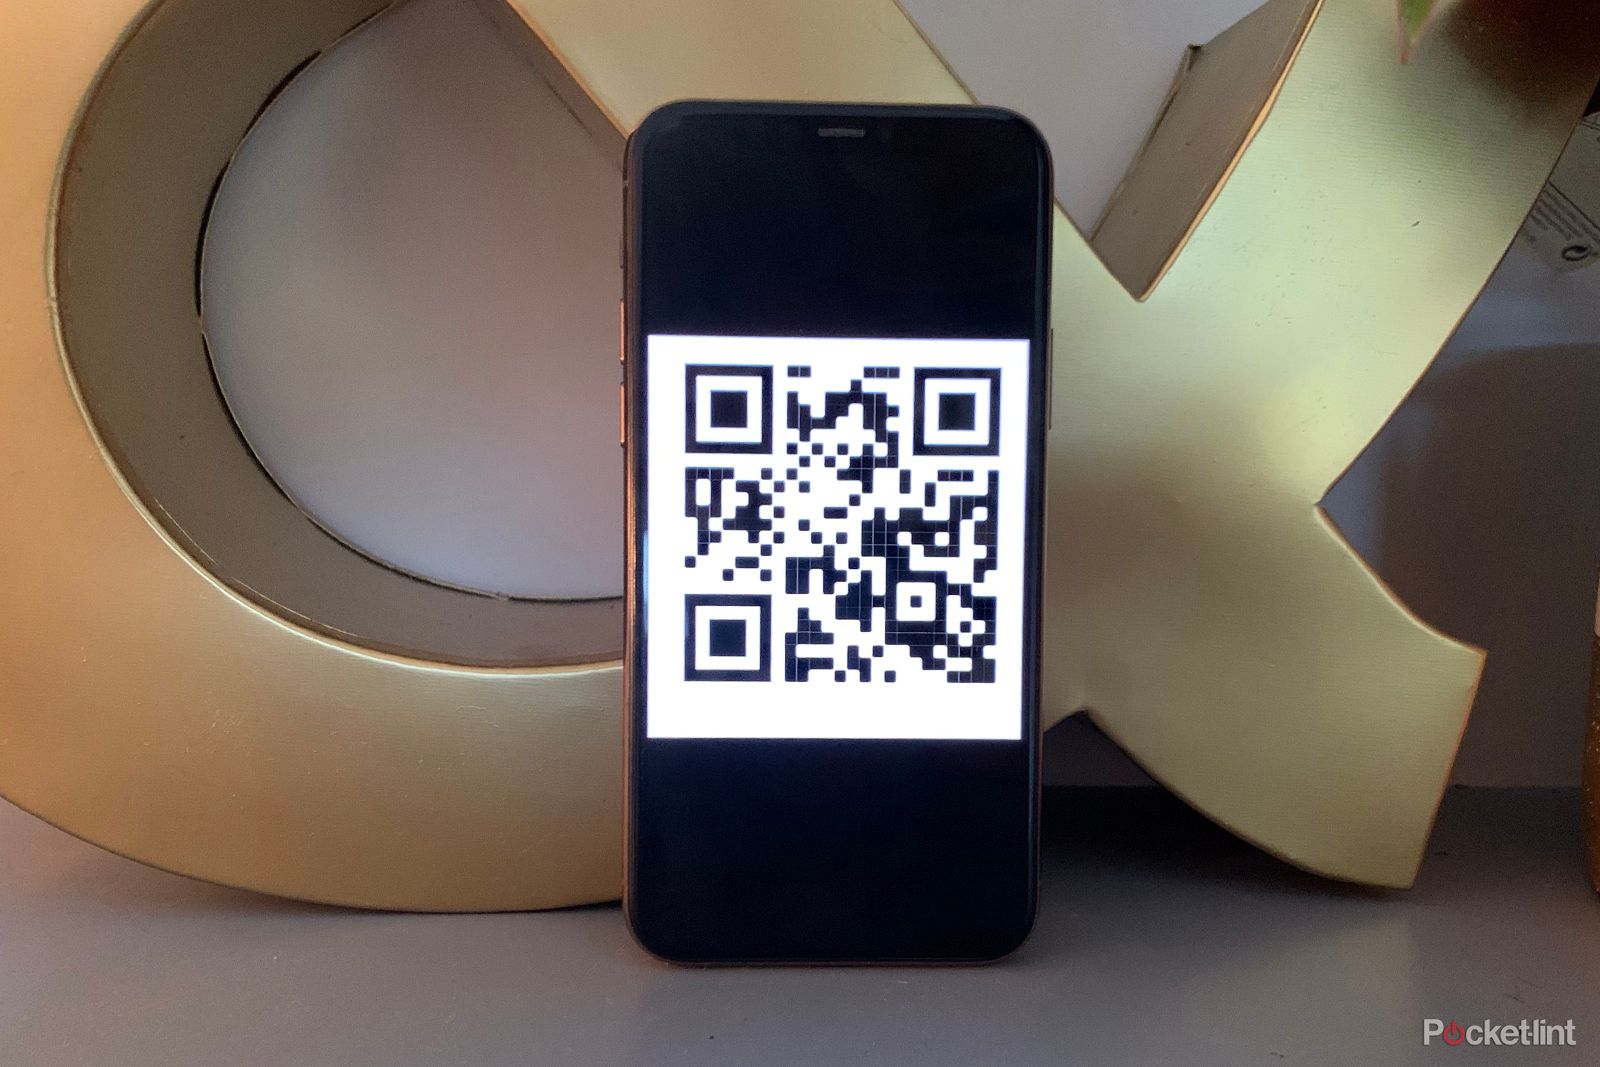 How Do I Scan a QR Code Inside My Phone Without Using Another